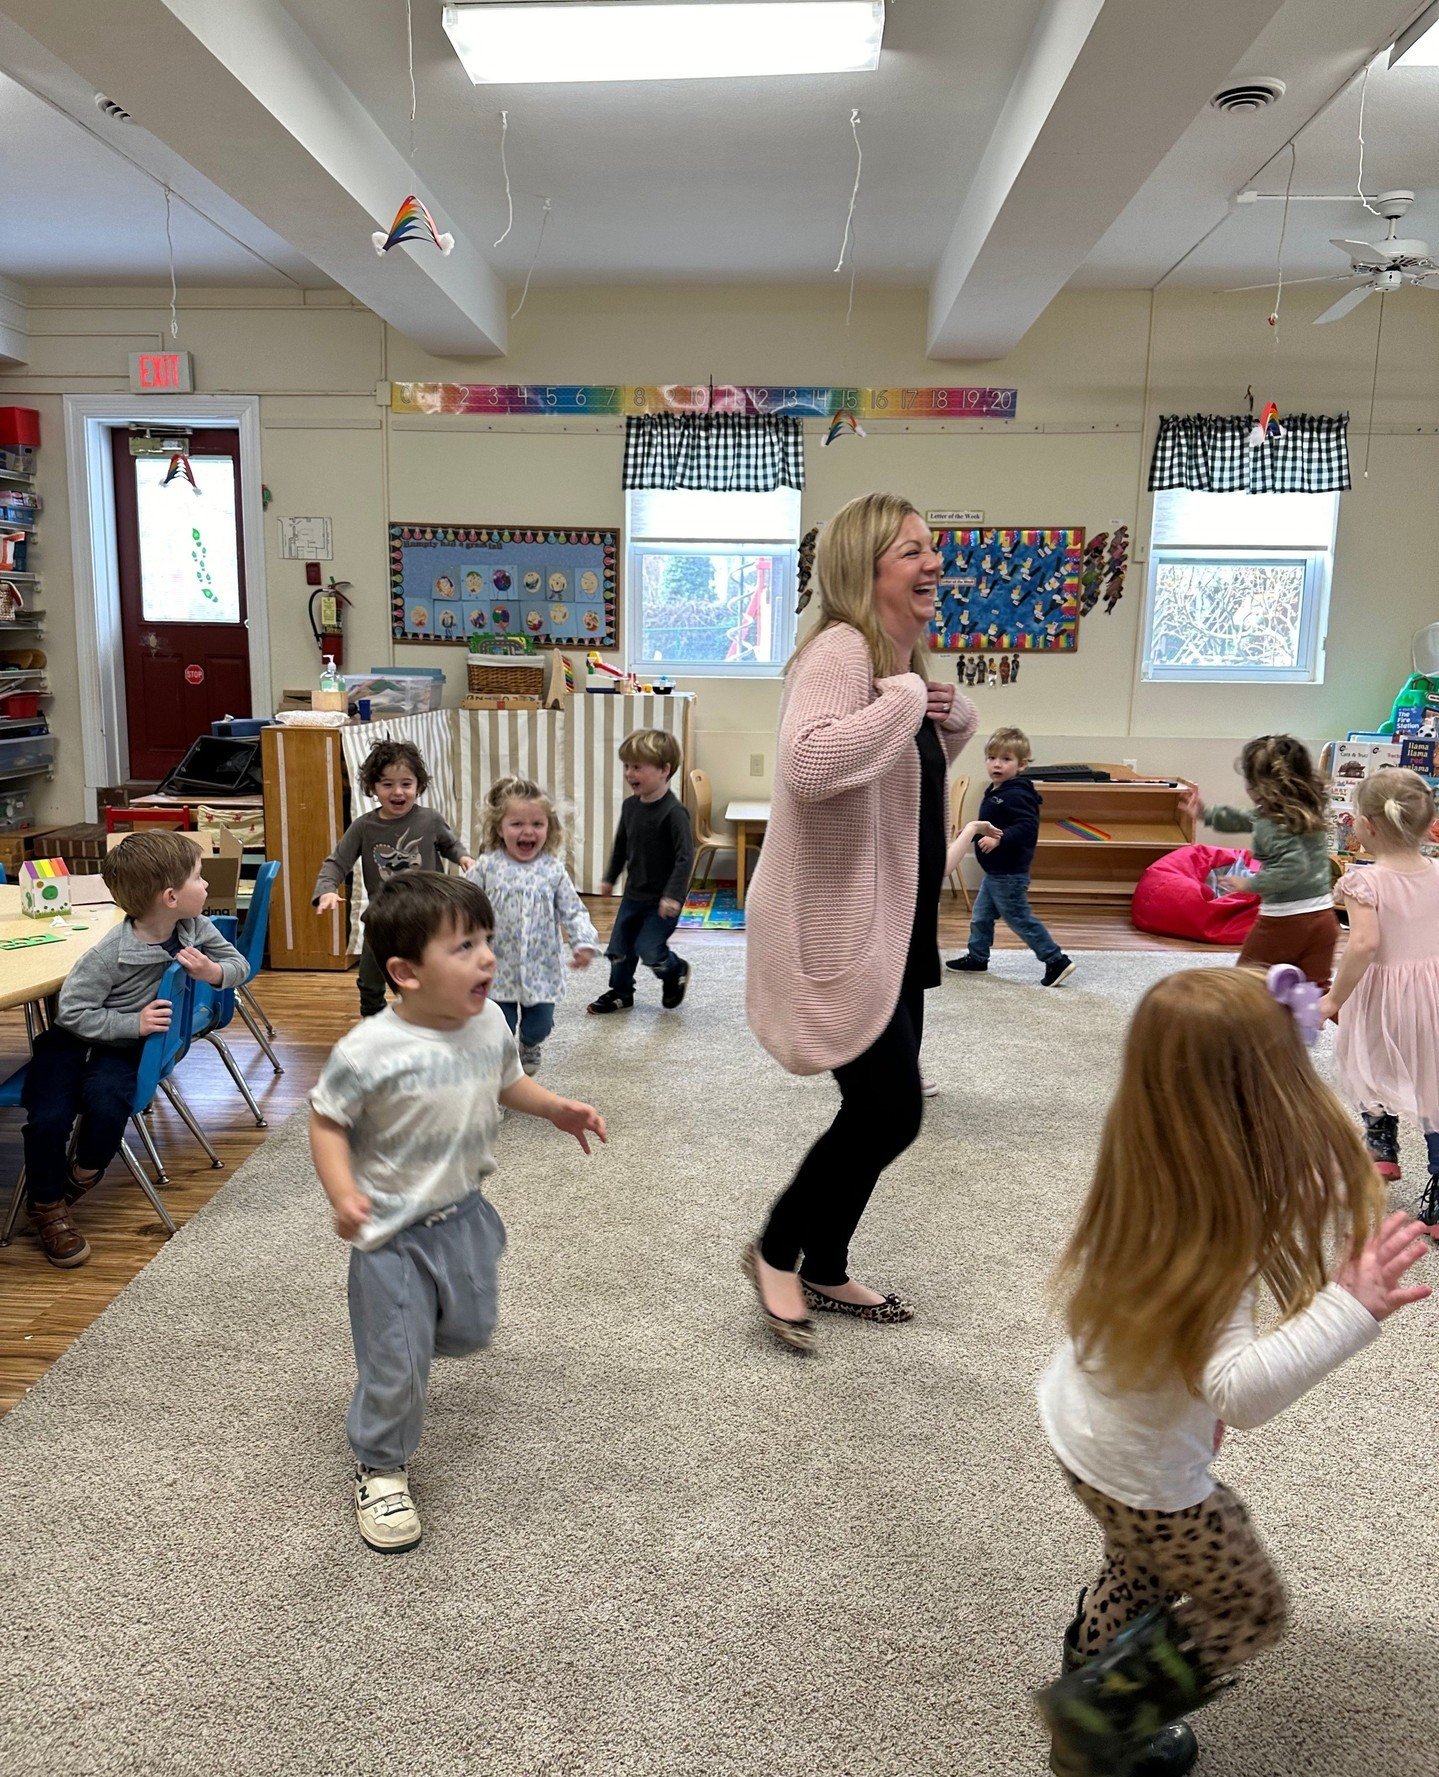 Including movement in our classrooms is the simplest step for brain breaks that allow students to wiggle, dance, tap their feet, or take a stretch.